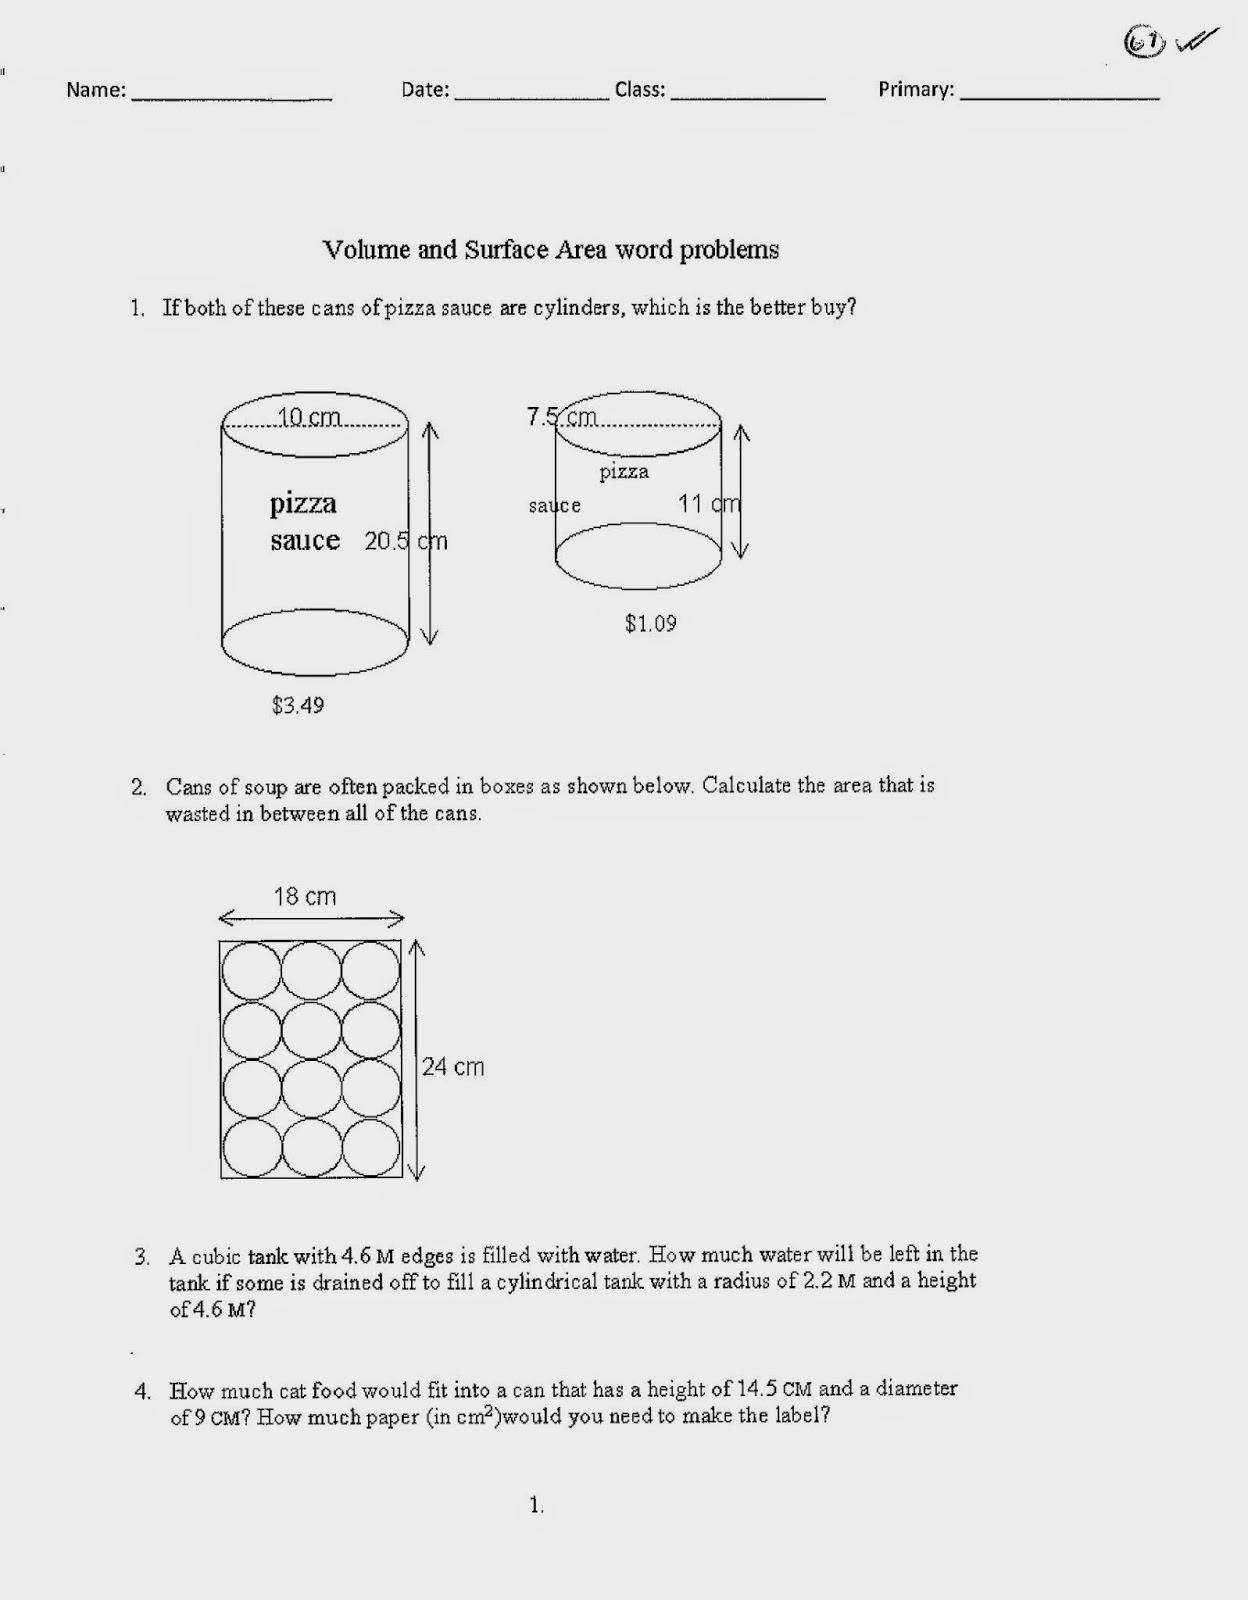 surface-area-and-volume-word-problems-pdf